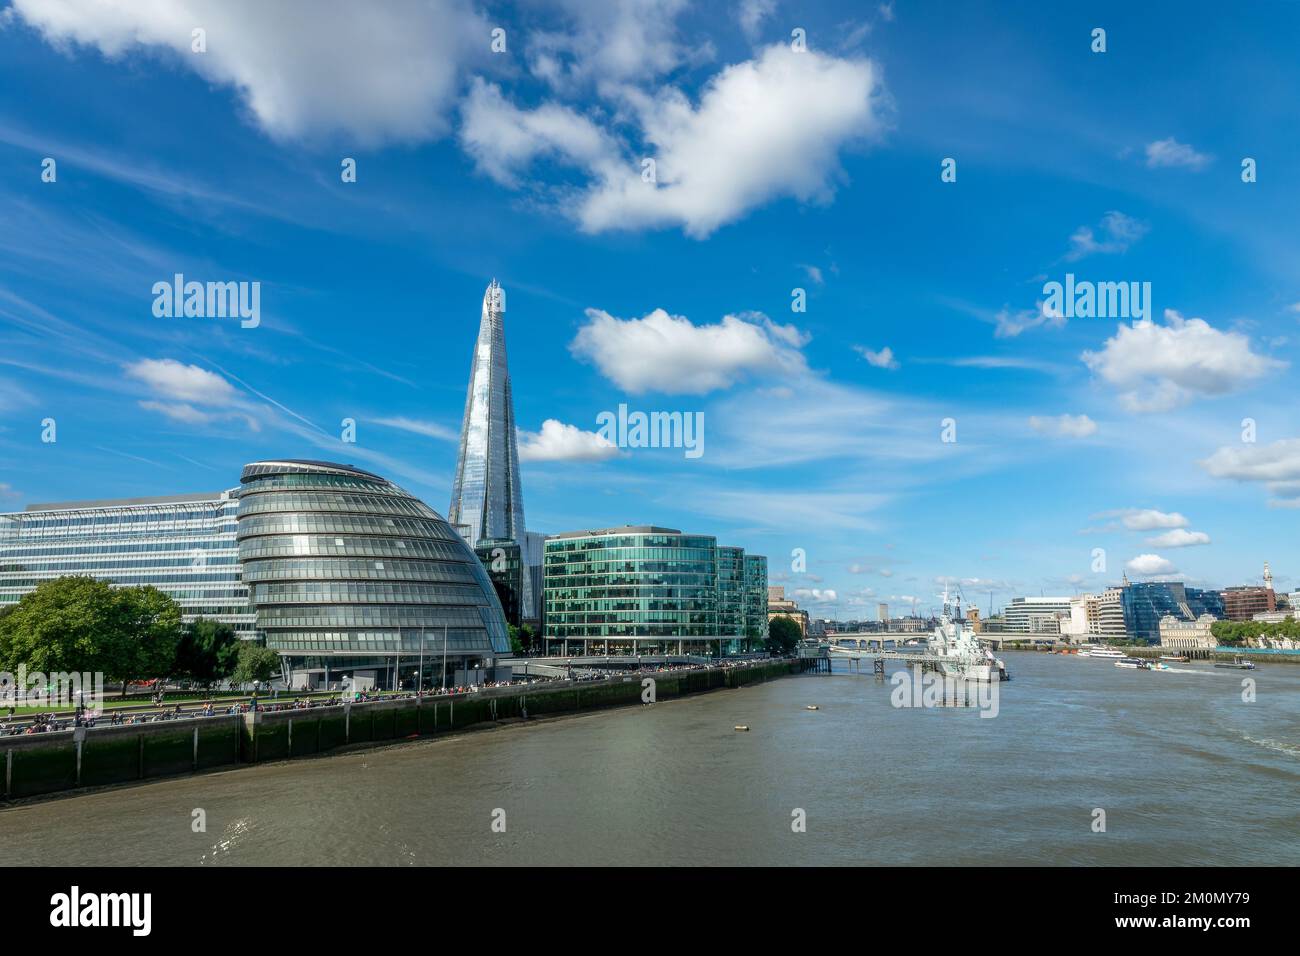 View of the Shard building and the Thames river, cityscape of London, UK Stock Photo